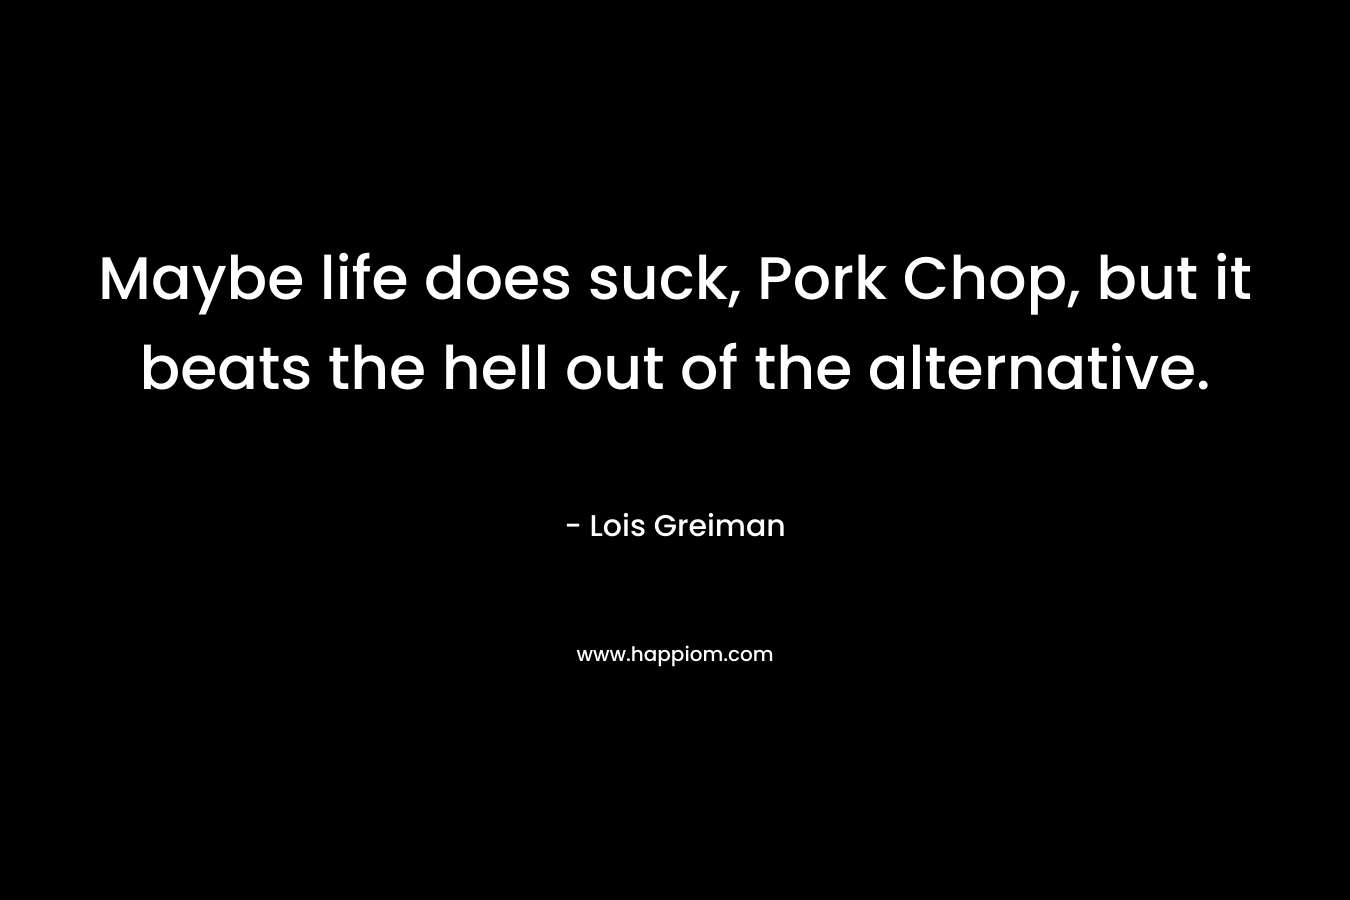 Maybe life does suck, Pork Chop, but it beats the hell out of the alternative.